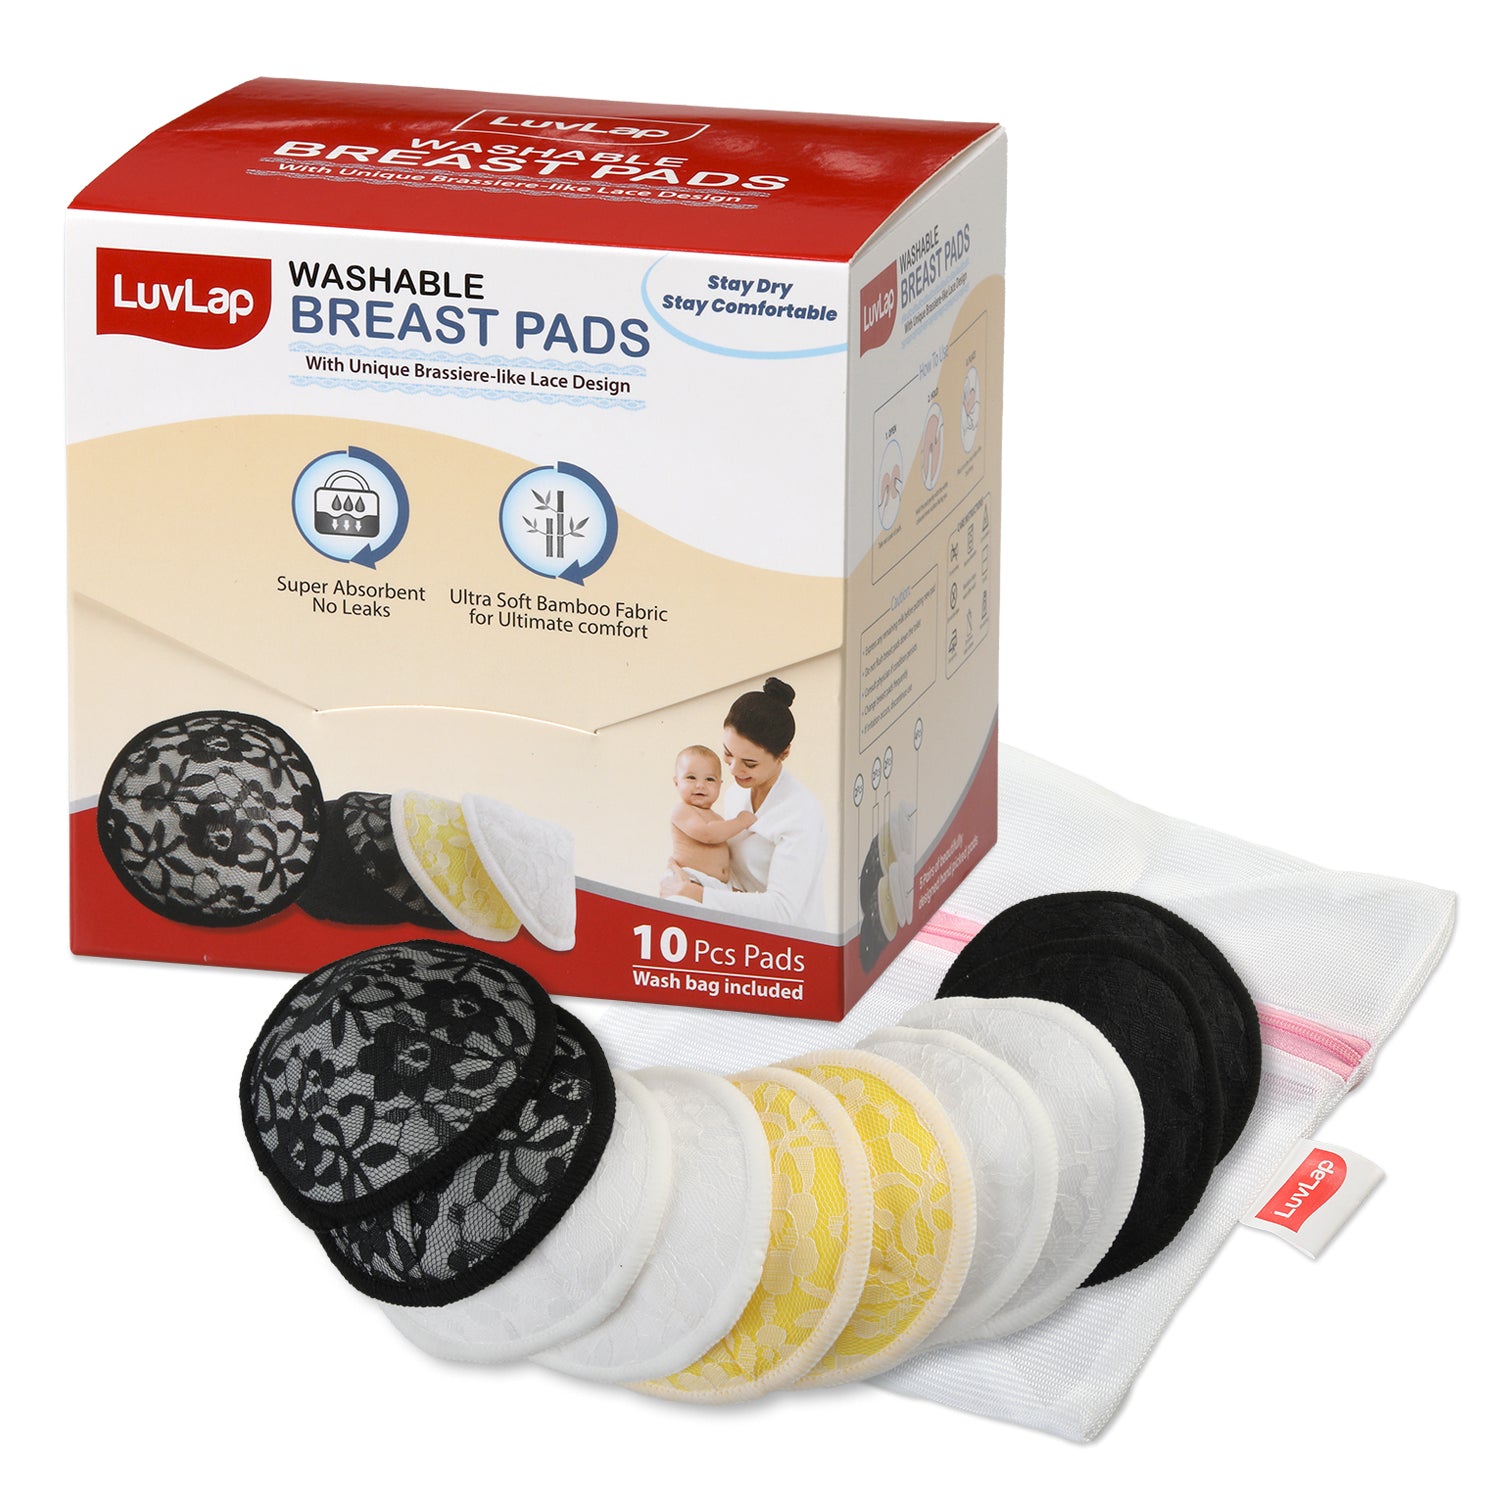 Up To 9% Off on Adhesive Reusable Bra Pads In